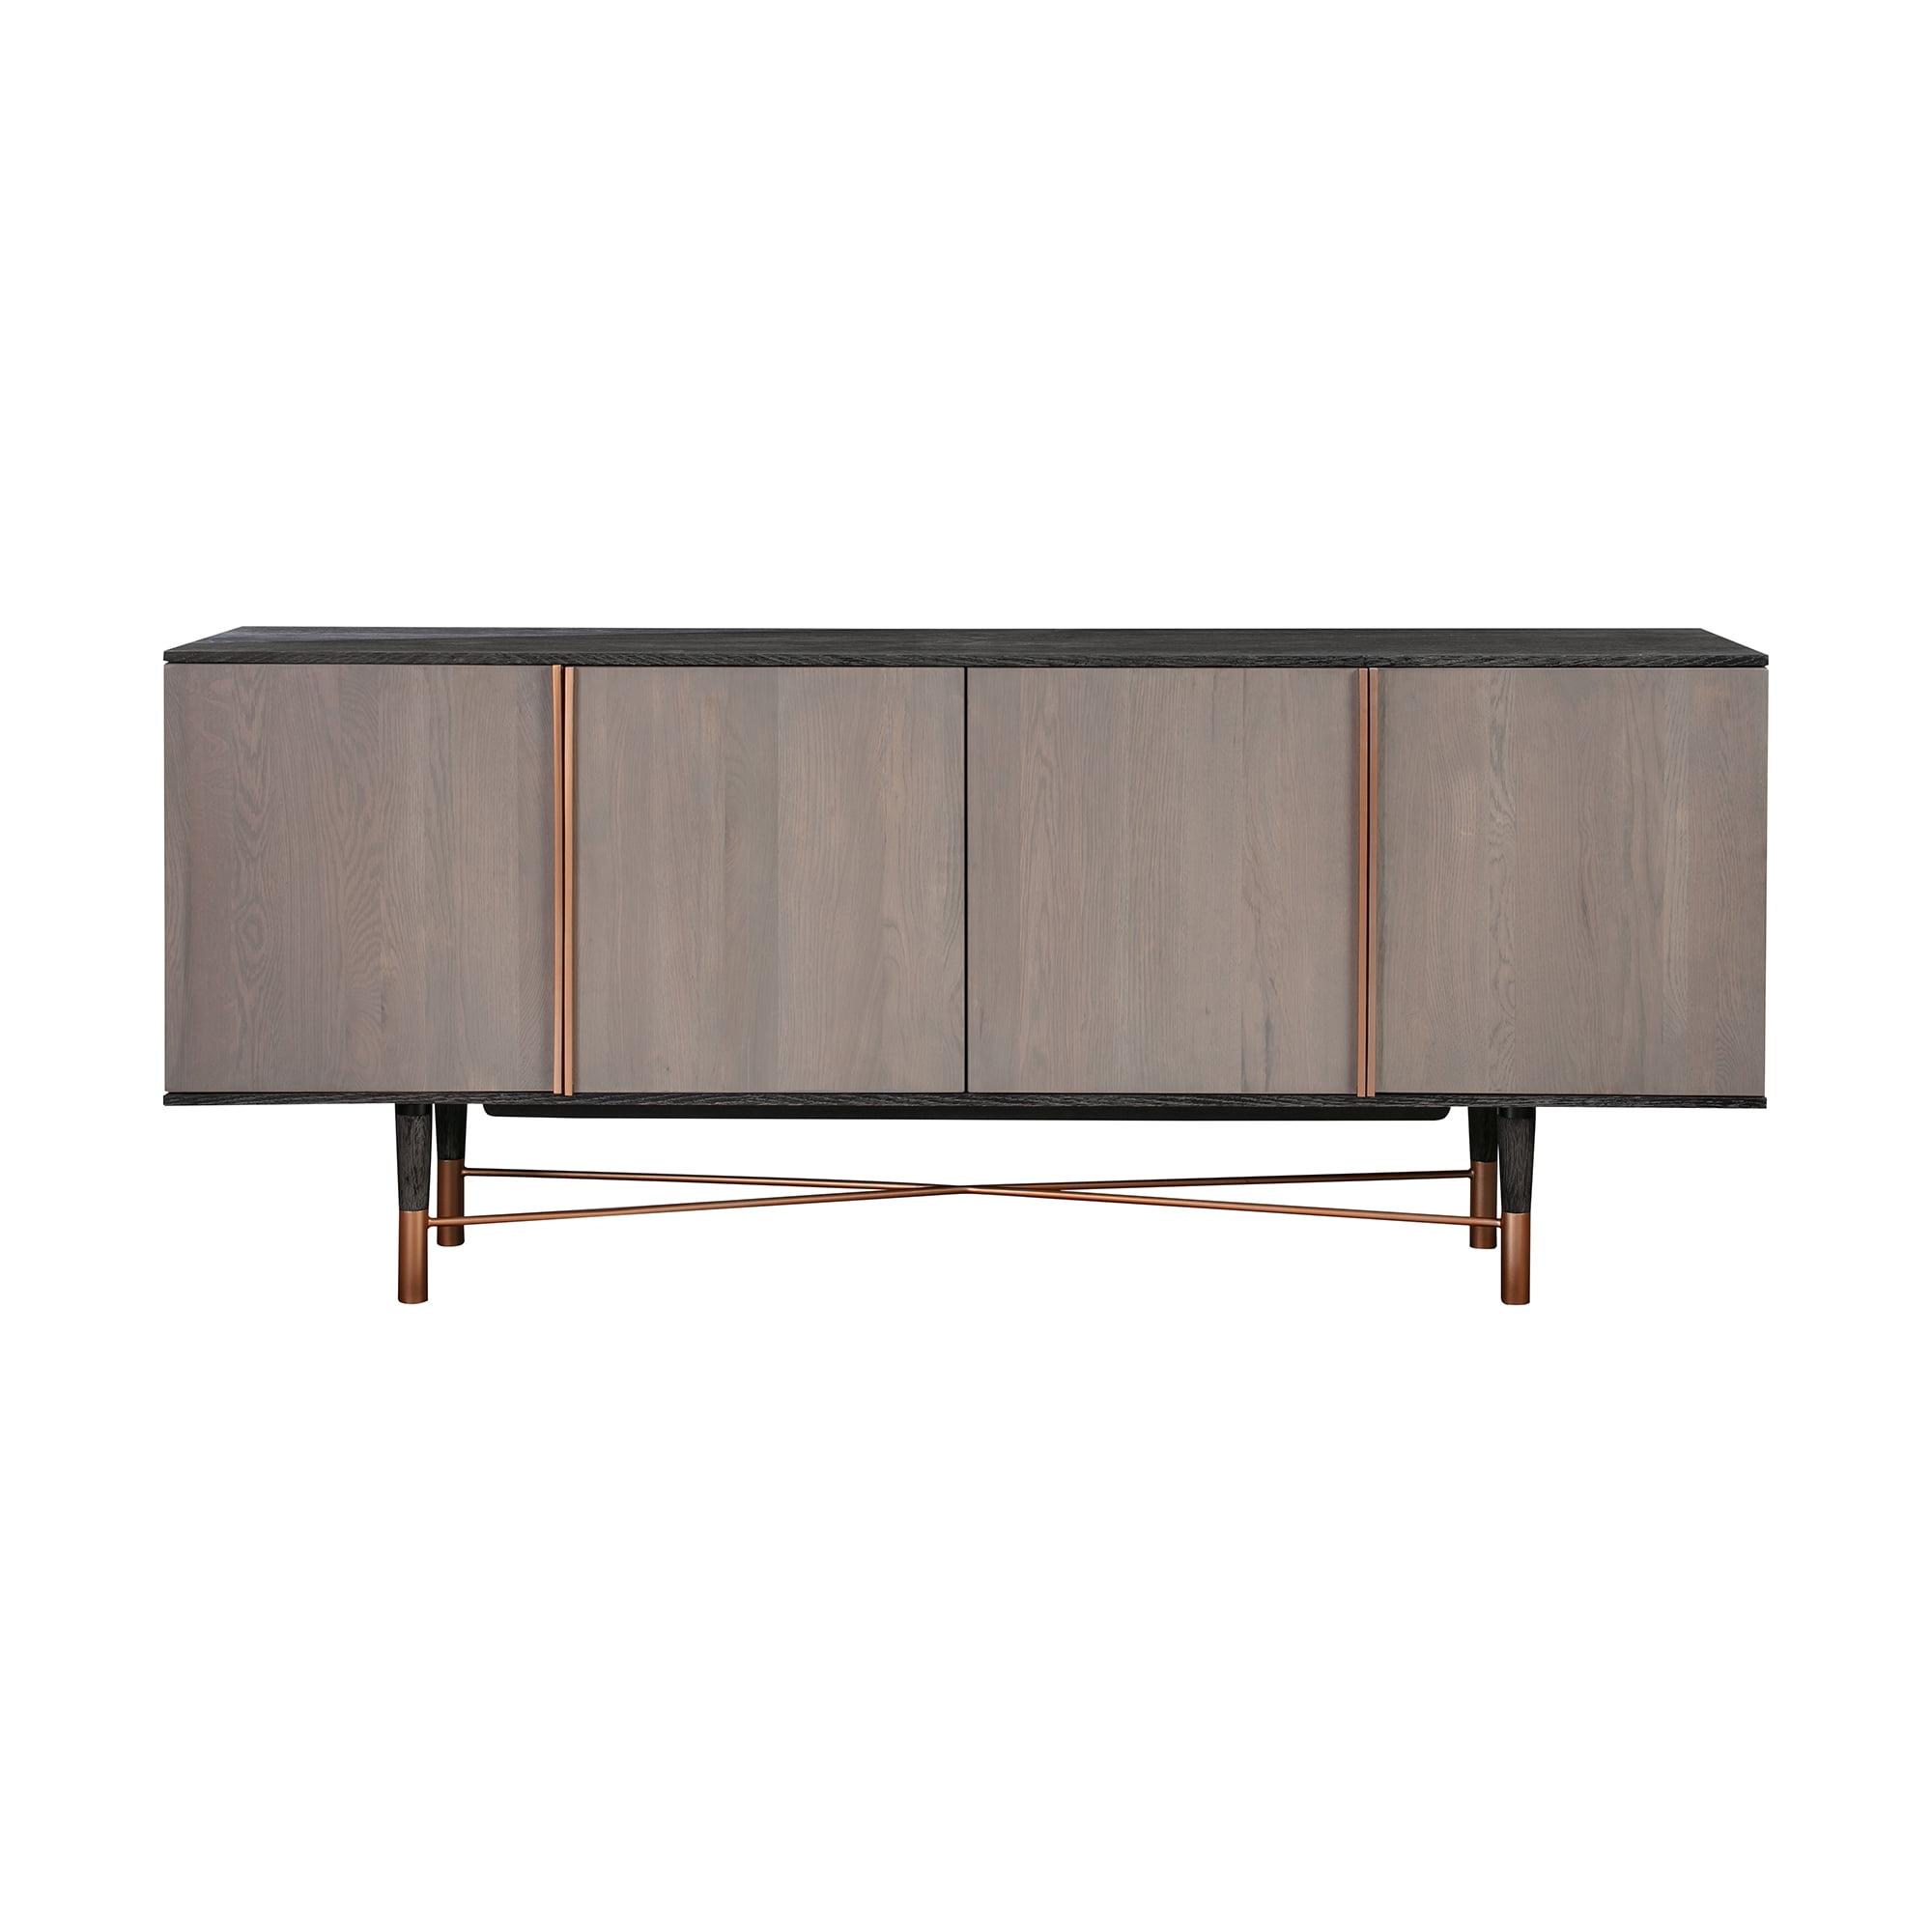 Turin Solid Oak Sideboard with Copper Accents and Spacious Cabinets